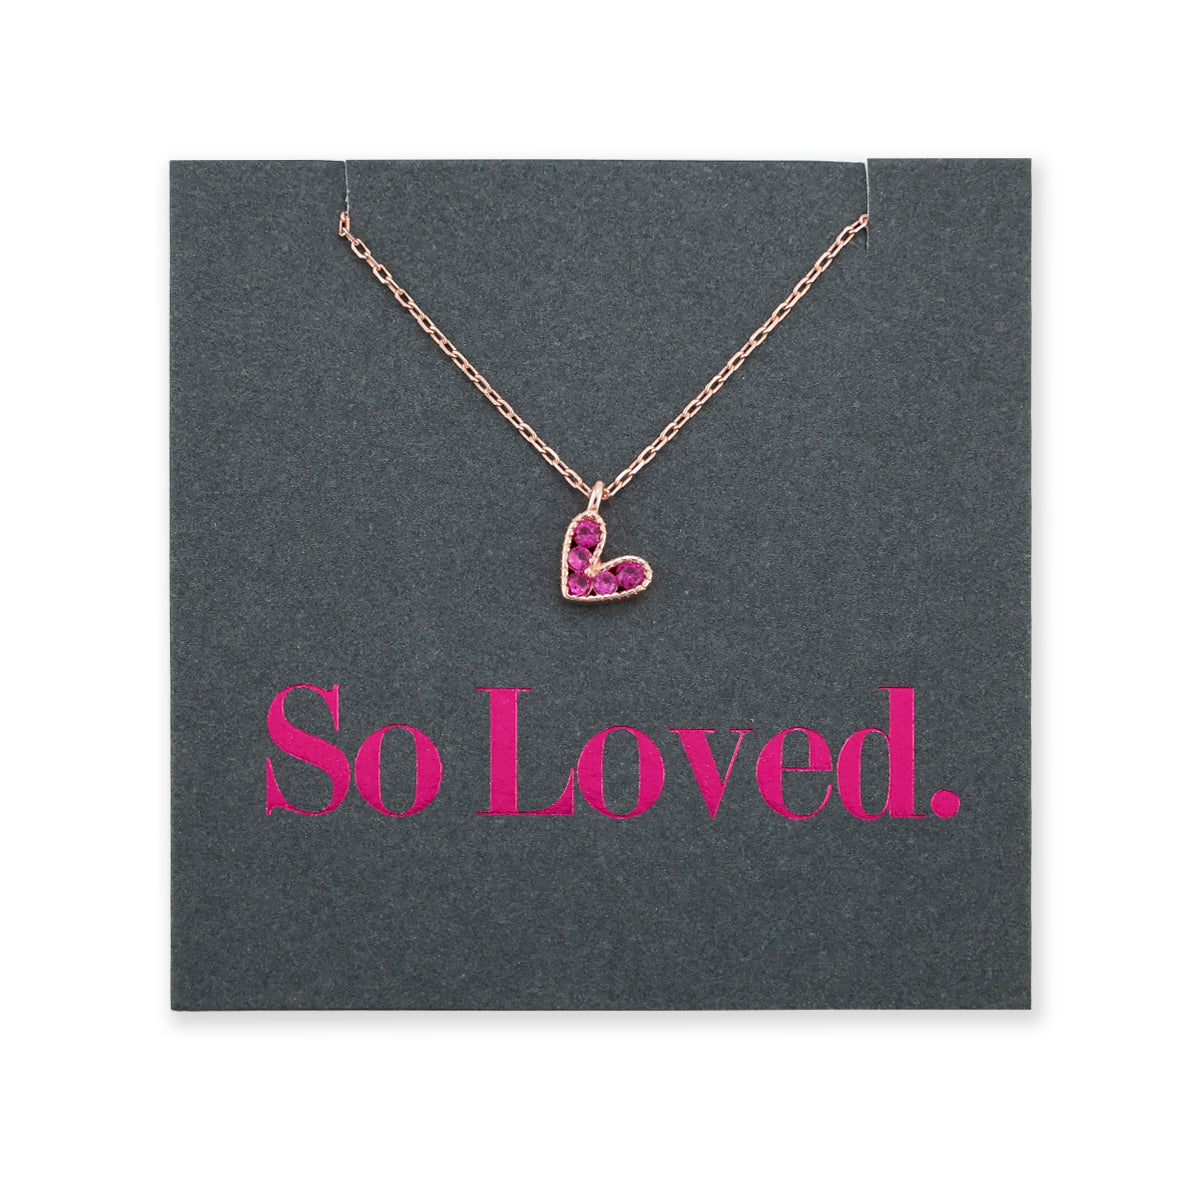 Pink heart pendant necklace sterling silver with 18K rose gold plating on gift card that has text that says so loved. 